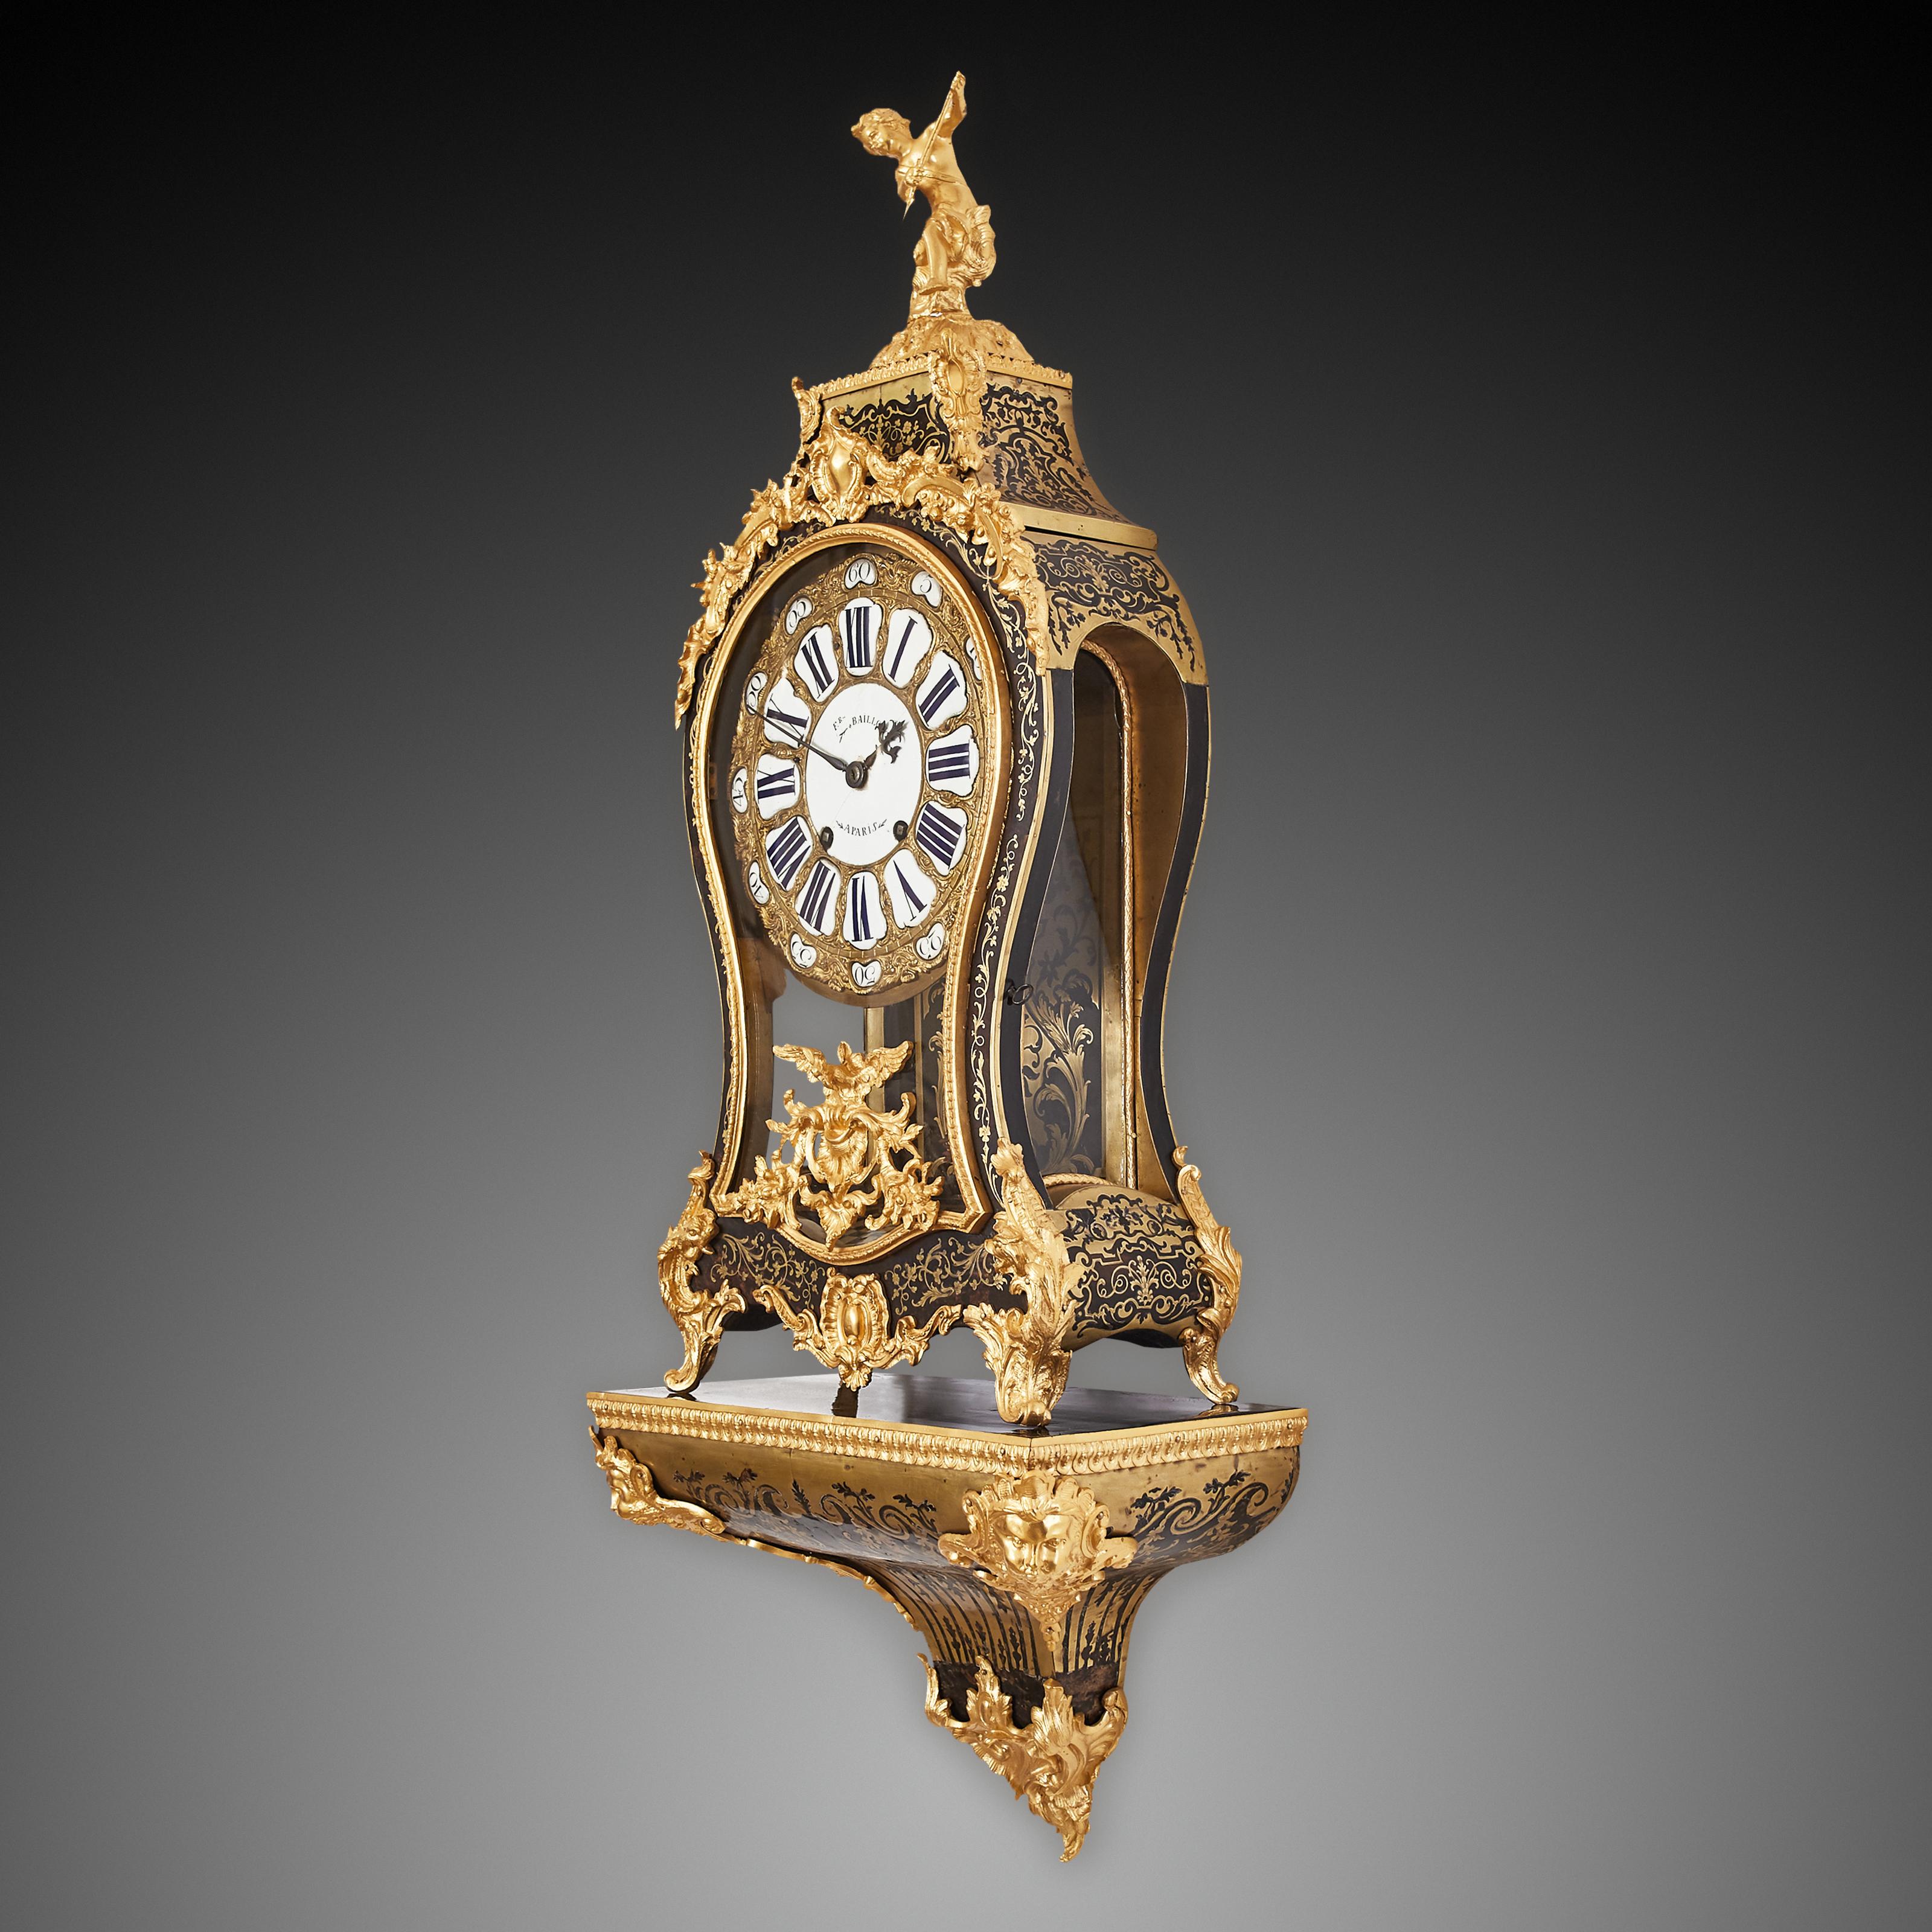 This magnificent cantilever clock was made in France in the 18th century during the reign of Louis XV. The clock exhibits many decorative elements and features from the reign of Louis XV's predecessor, when Boulle's works were popular.Andre-Charles